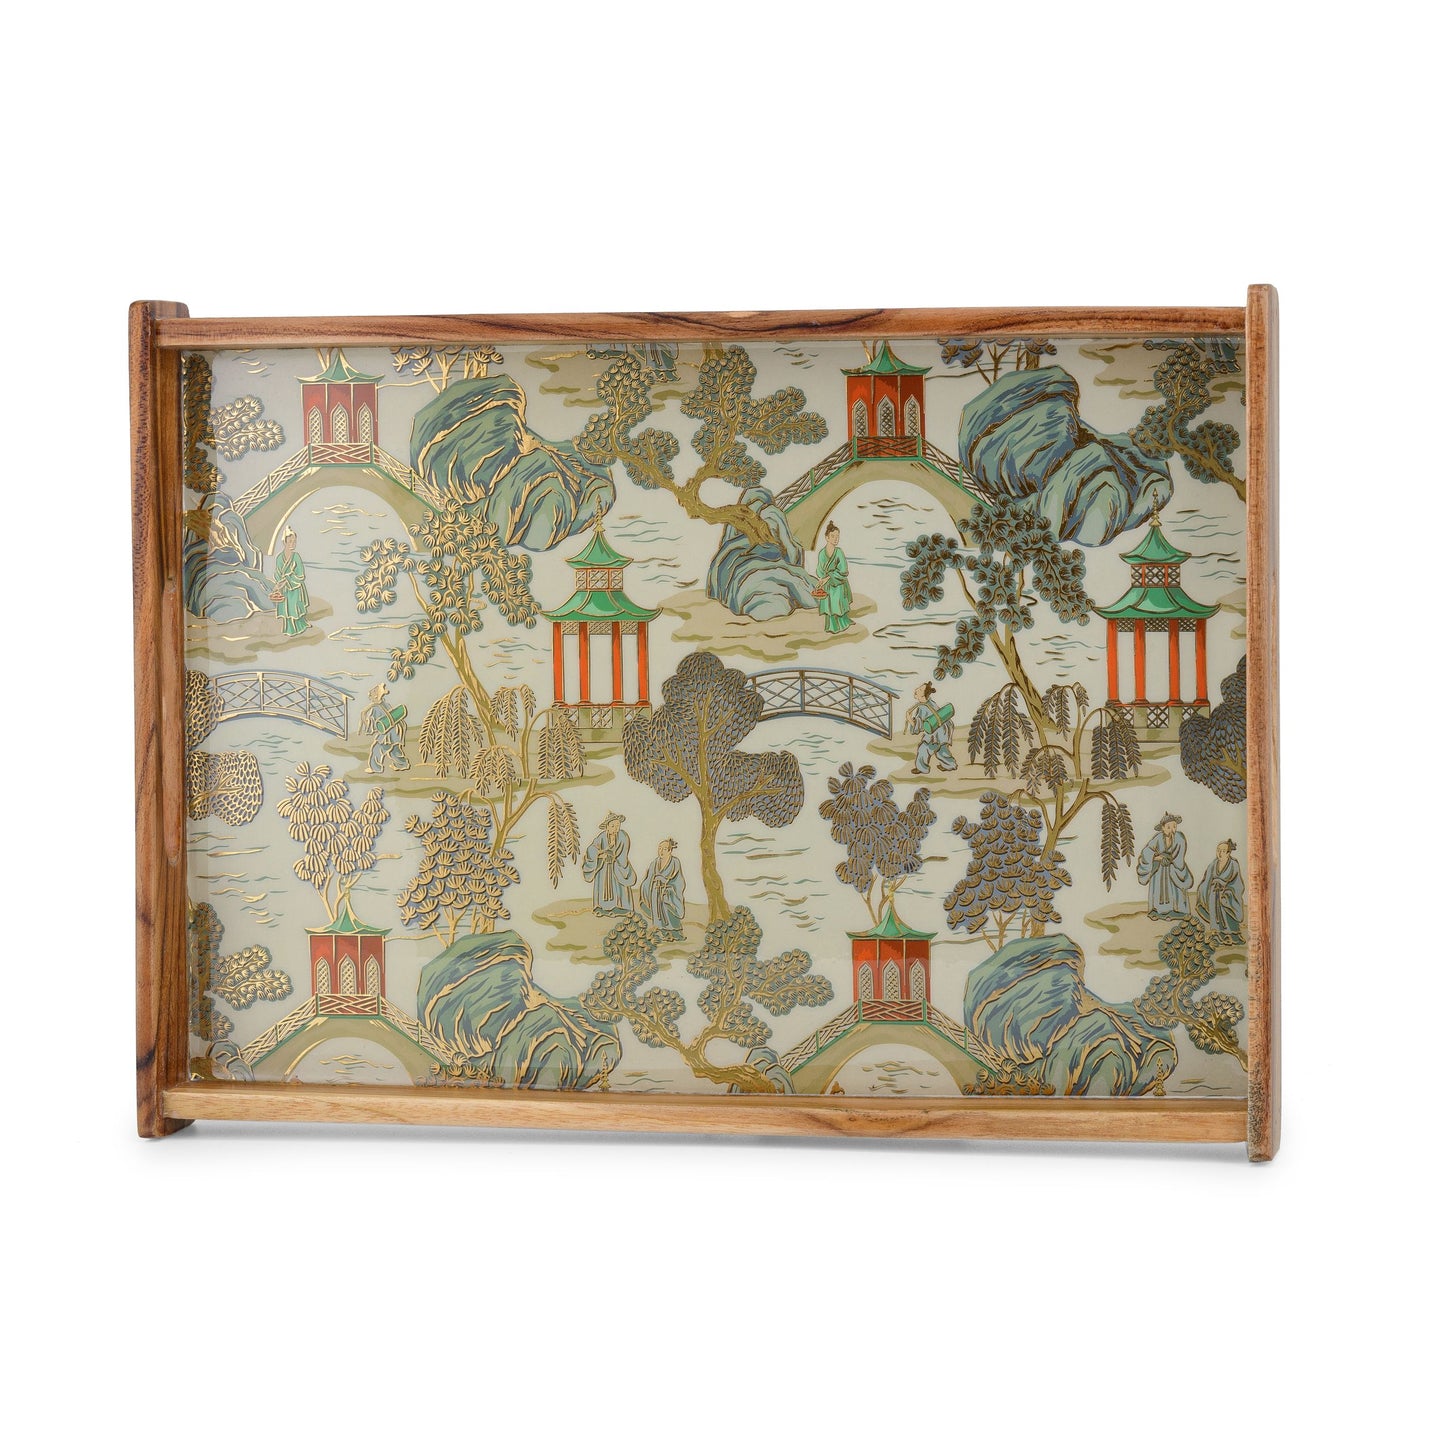 -Villaggio chinoiserie-Rectangle tray- 15”x11” (Large), and 13”x9.5” (Medium) -Set of two-